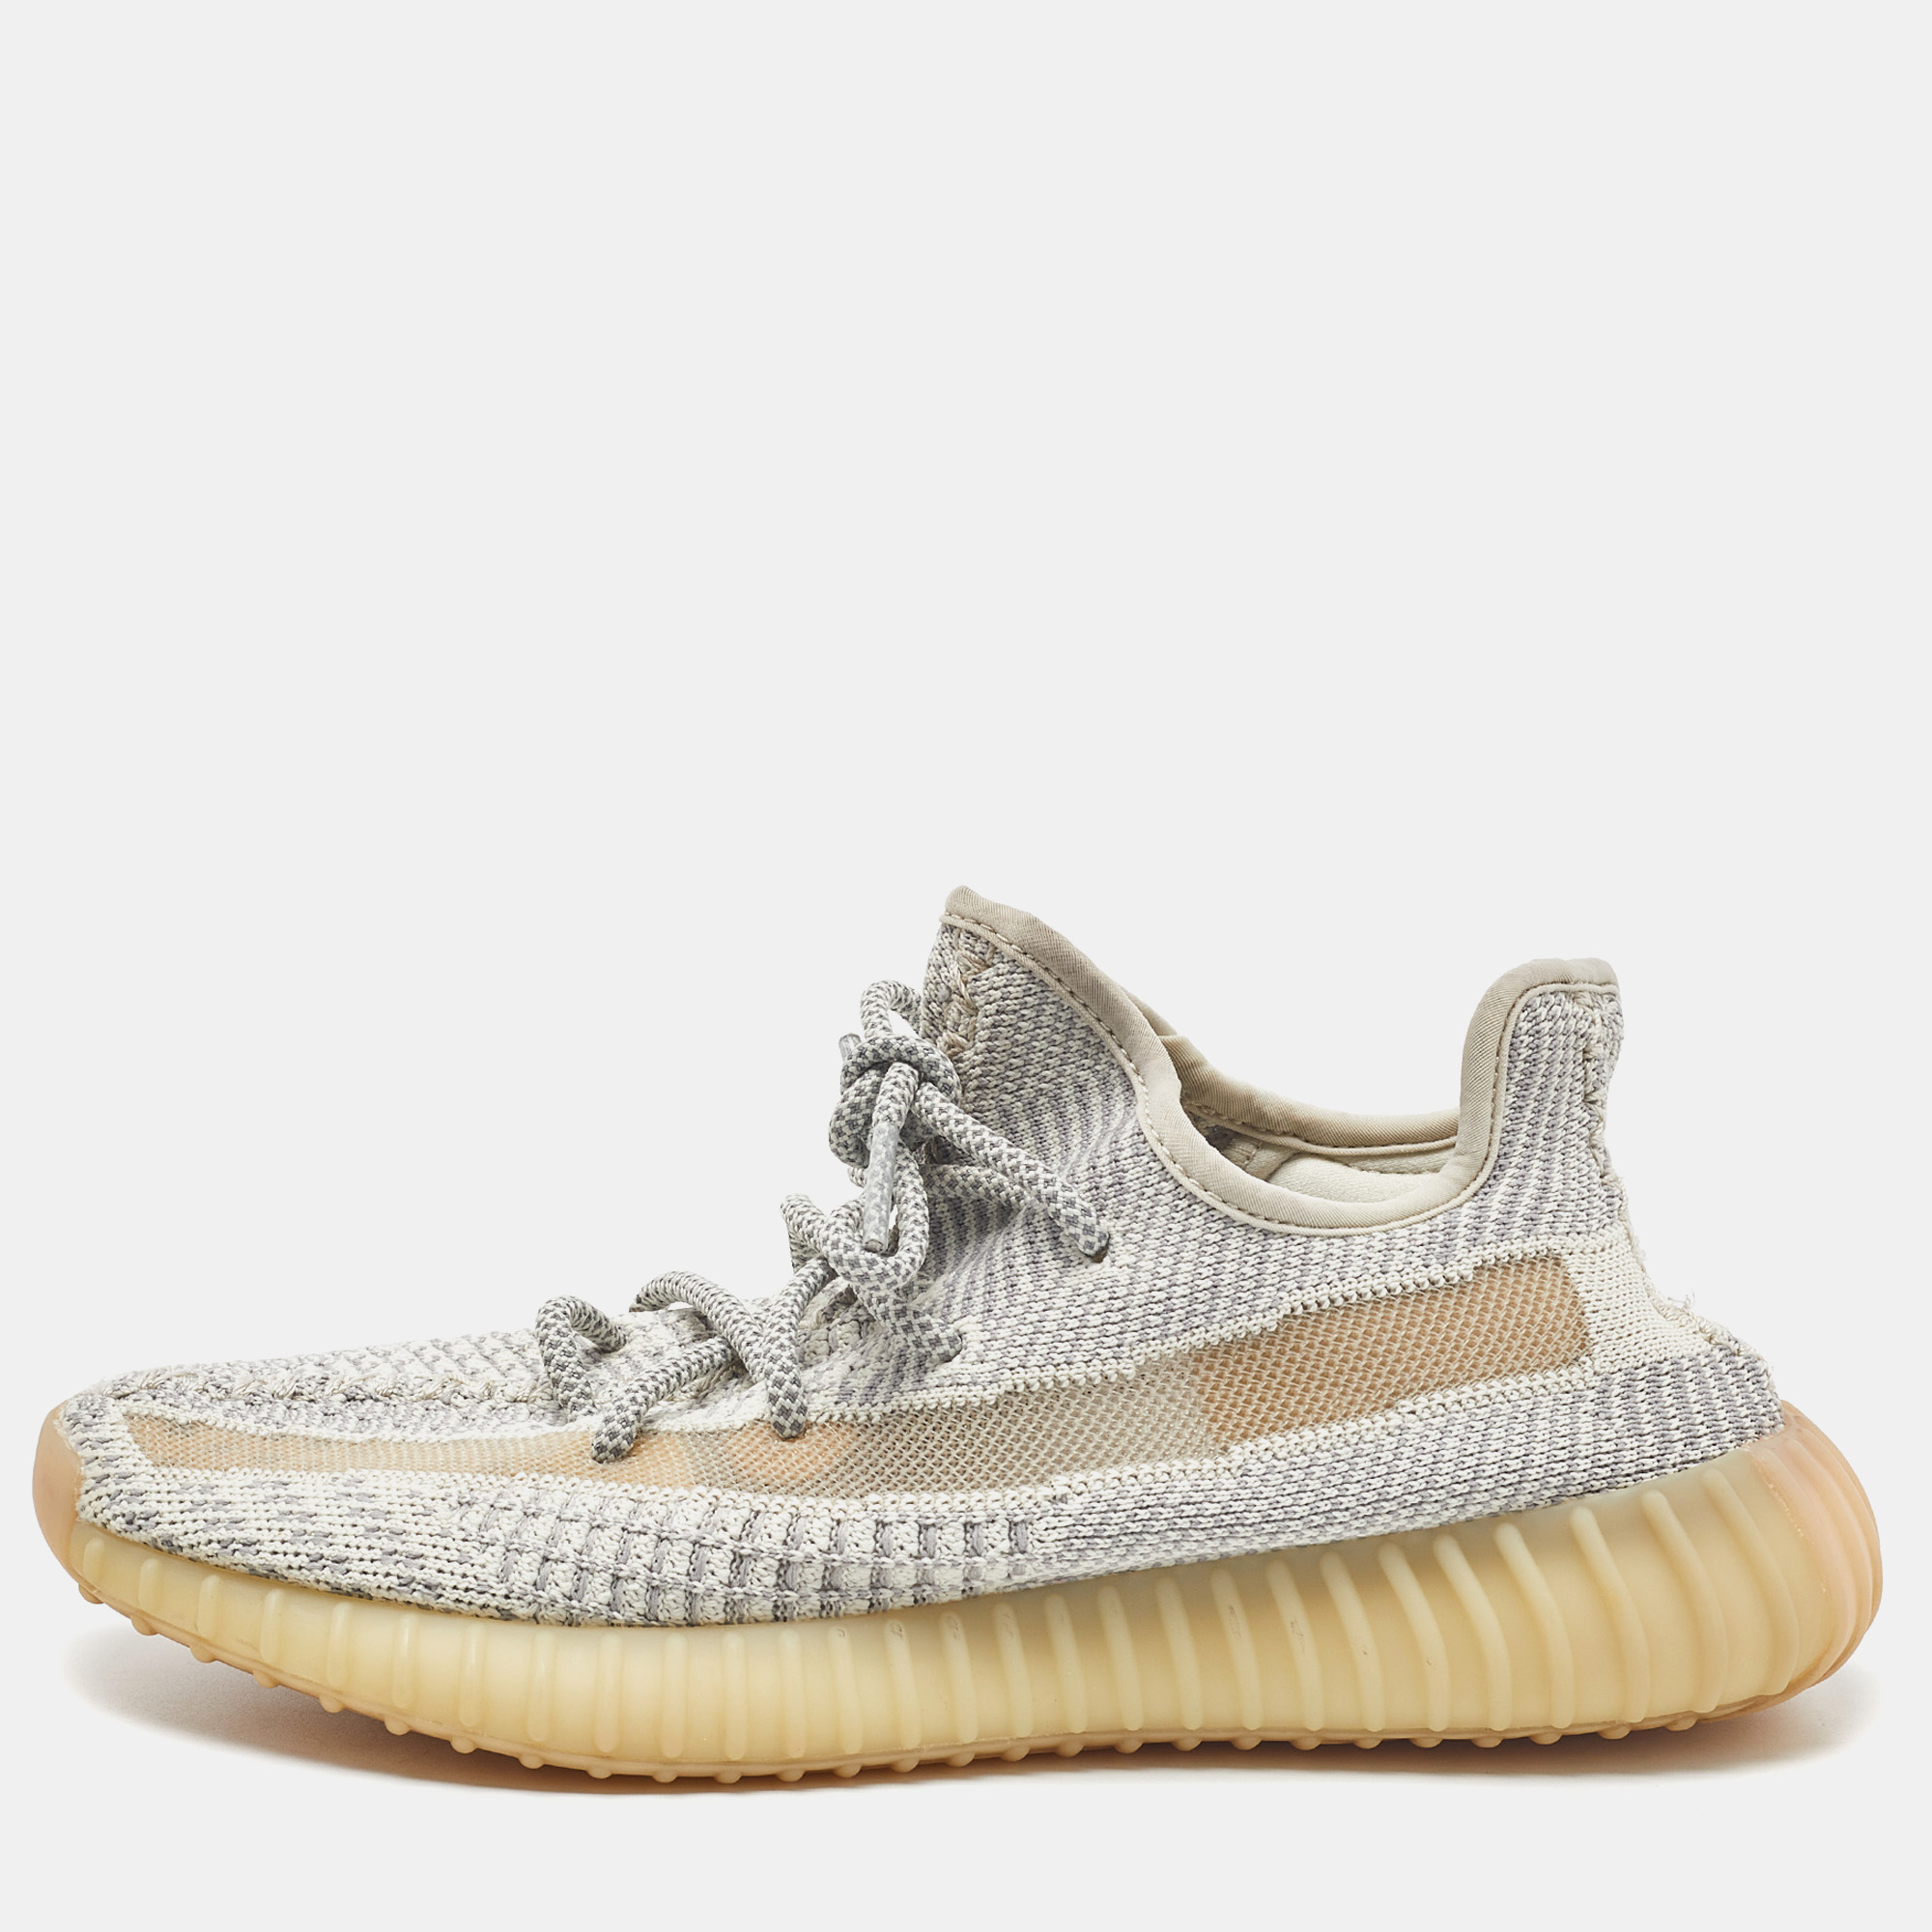 Pre-owned Yeezy X Adidas Boost 350 V2 Lundmark Non-reflective Sneakers Size 39 1/3 In Beige